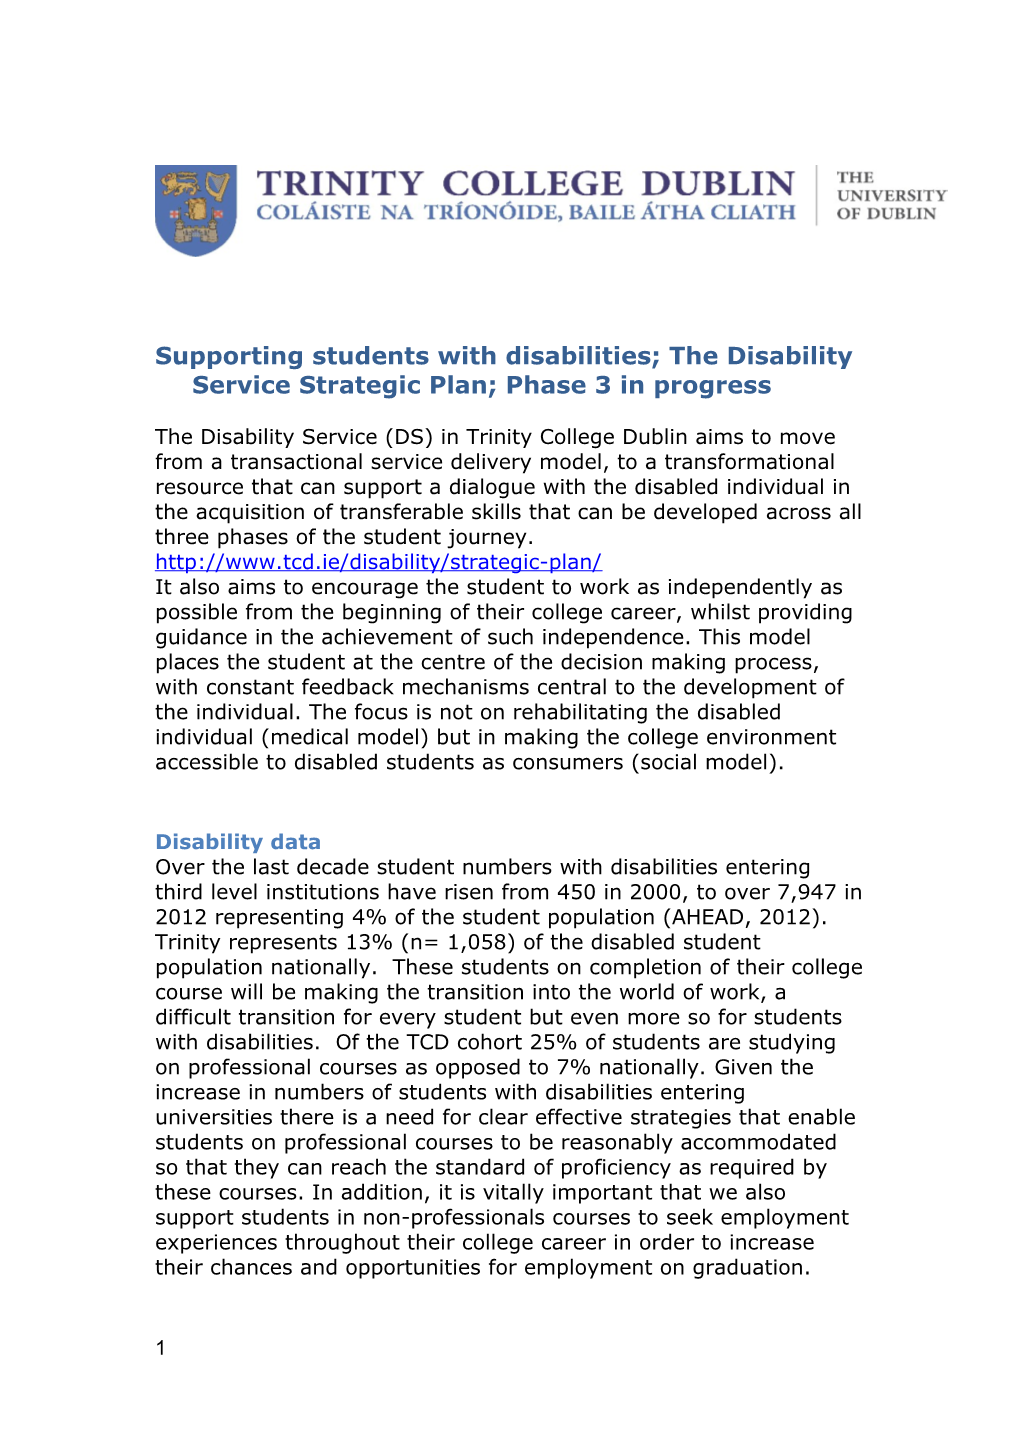 Supporting Students with Disabilities; the Disability Service Strategic Plan; Phase 3 In